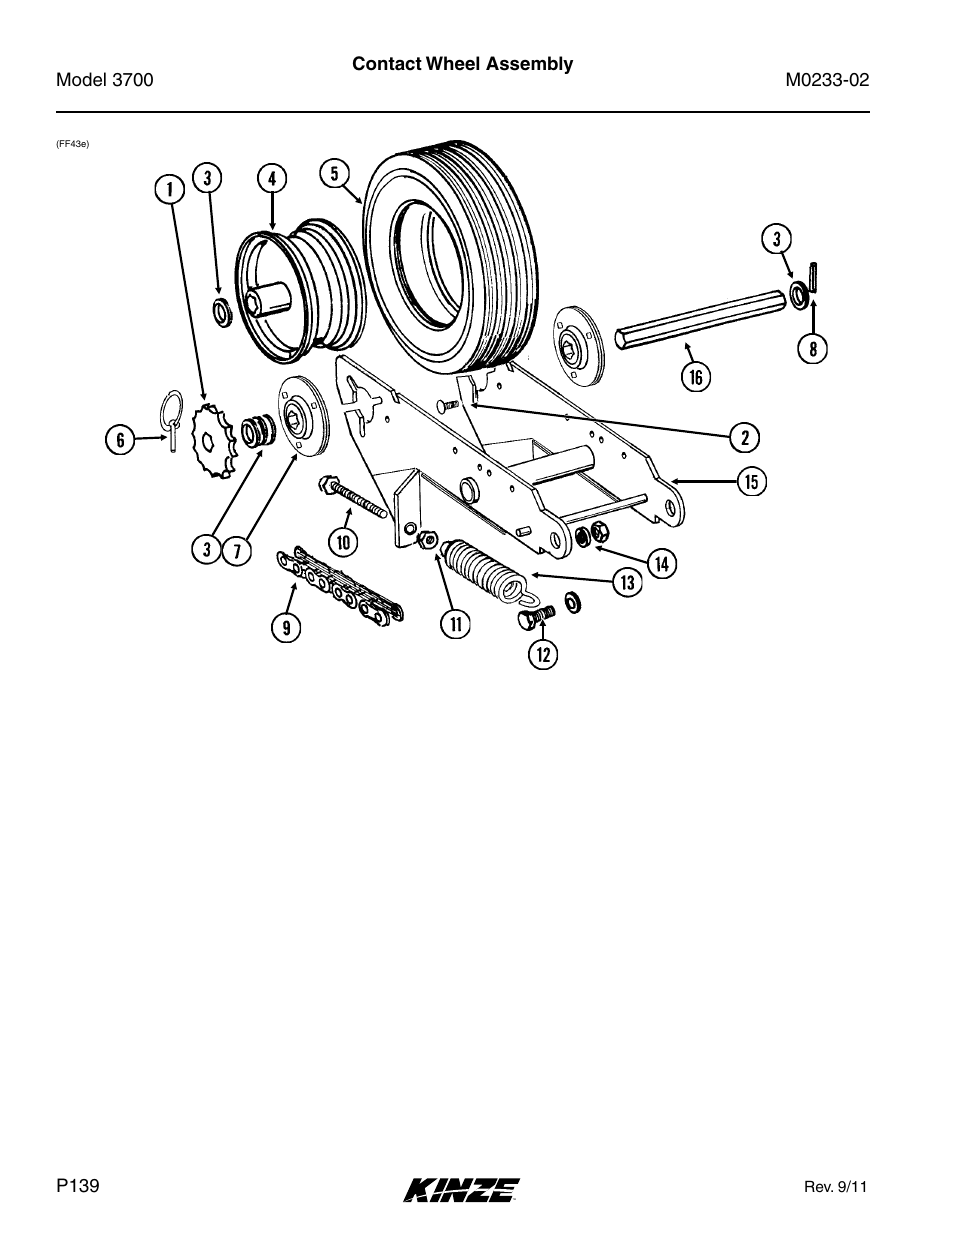 Contact wheel assembly | Kinze 3700 Front Folding Planter Rev. 6/14 User Manual | Page 142 / 284